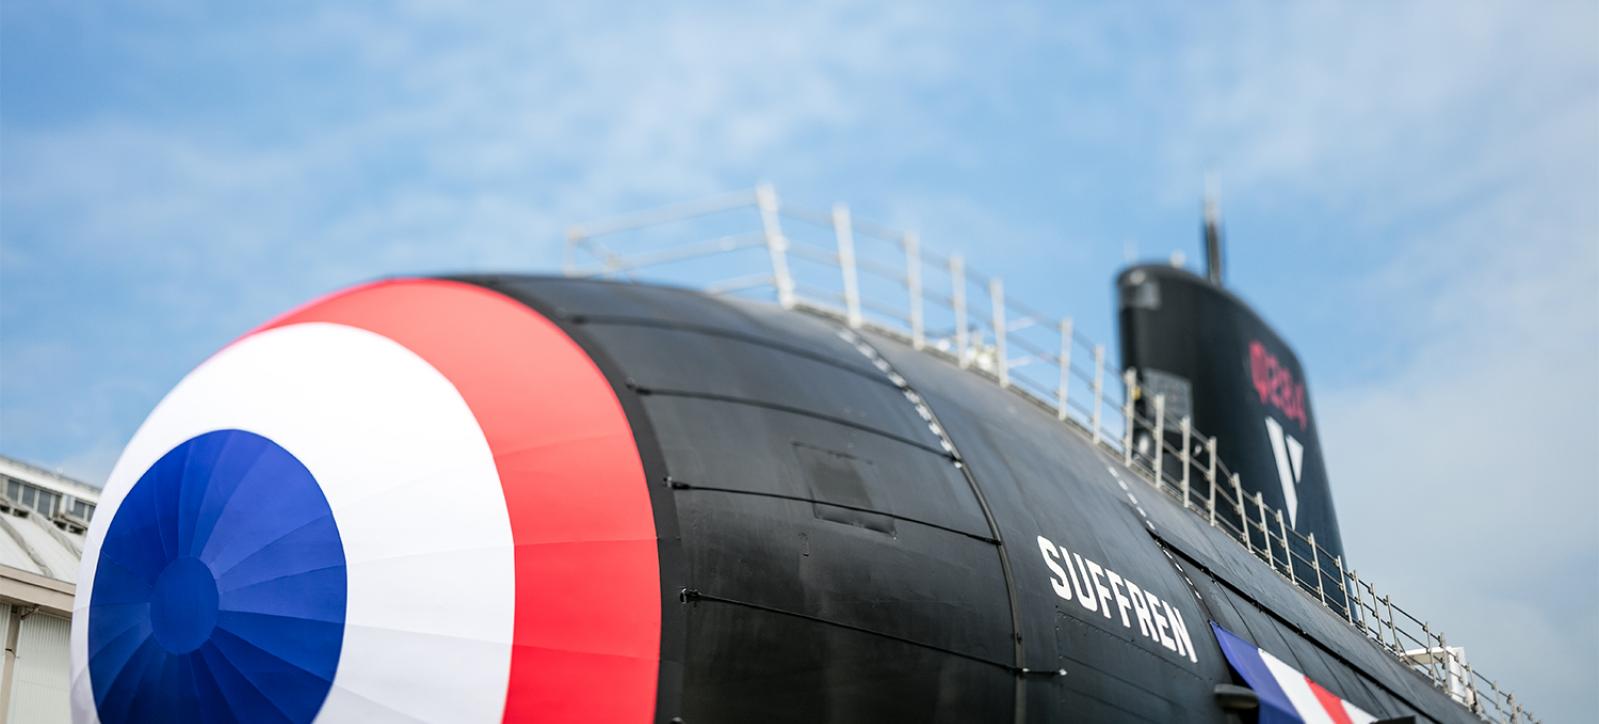 The Suffren ship subsurface nuclear (SSN) submarine during its launch on the launching facility